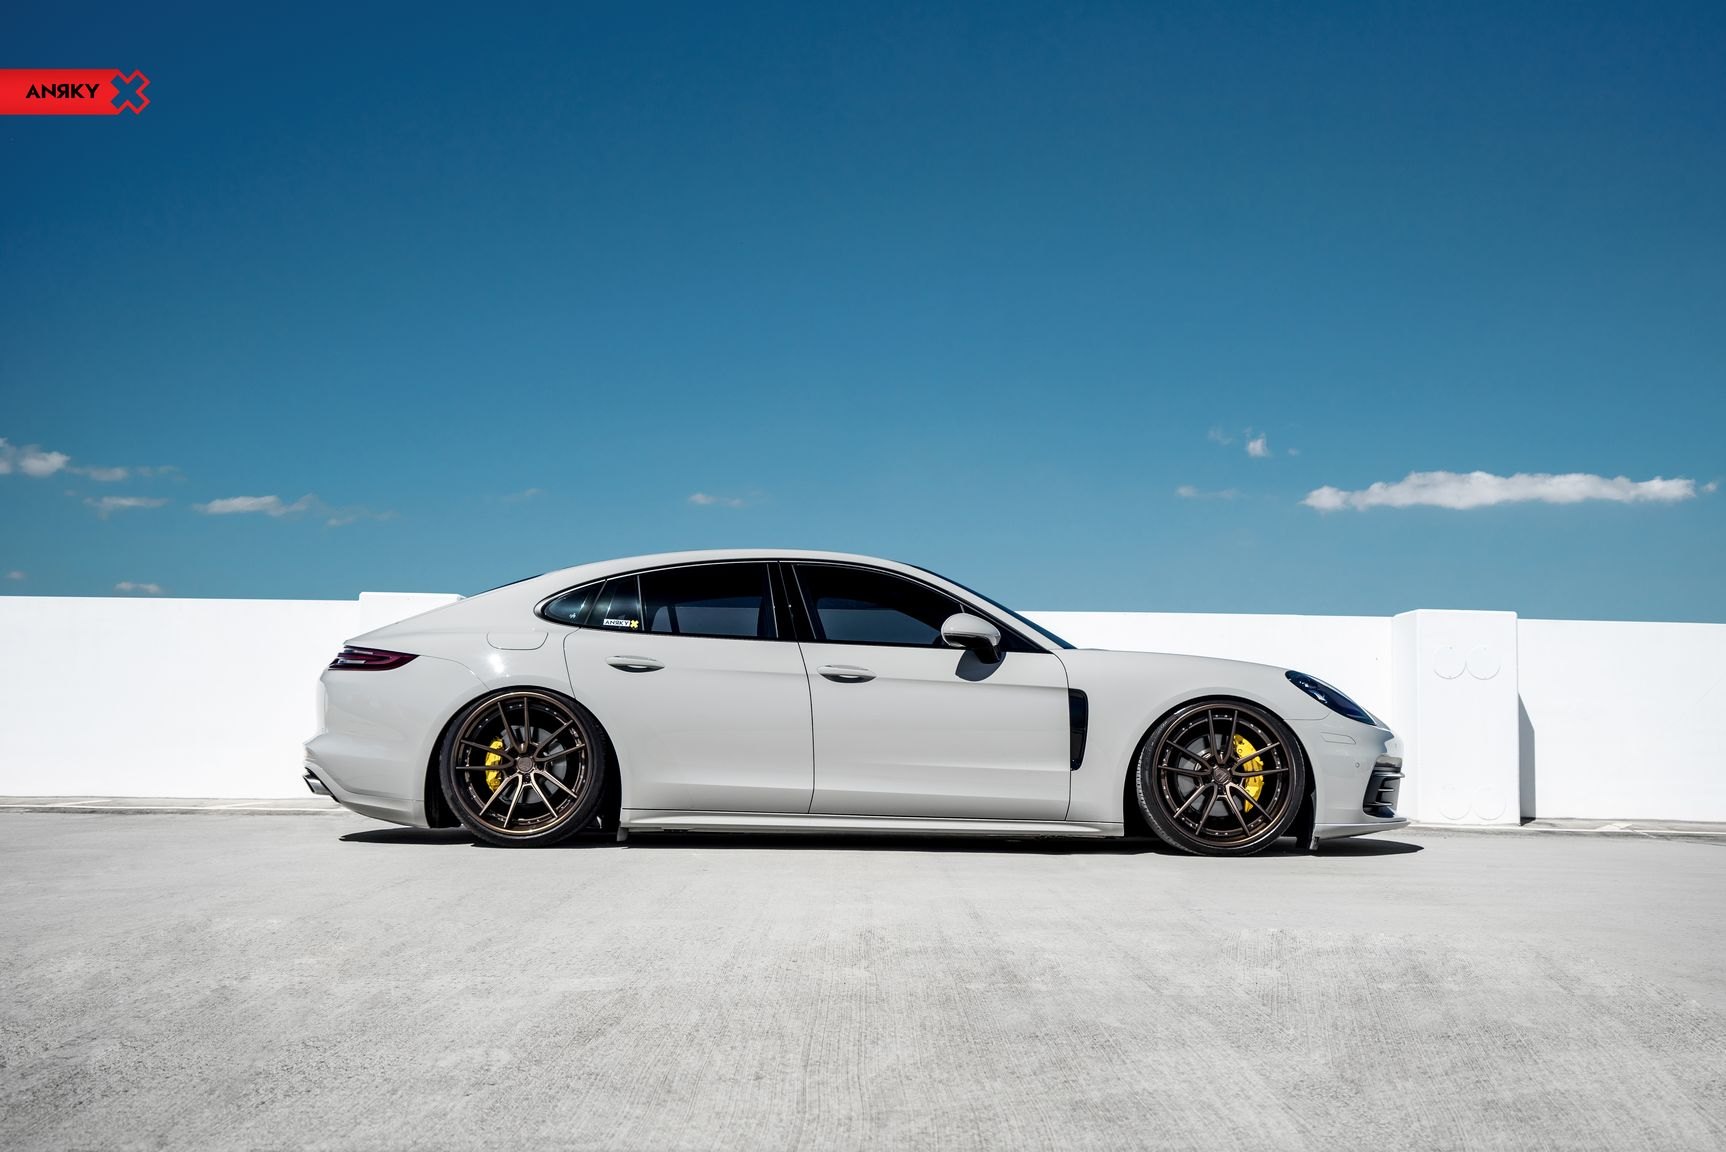 Gray Porsche Panamera with Custom Anrky Wheels - Photo by Anrky Wheels